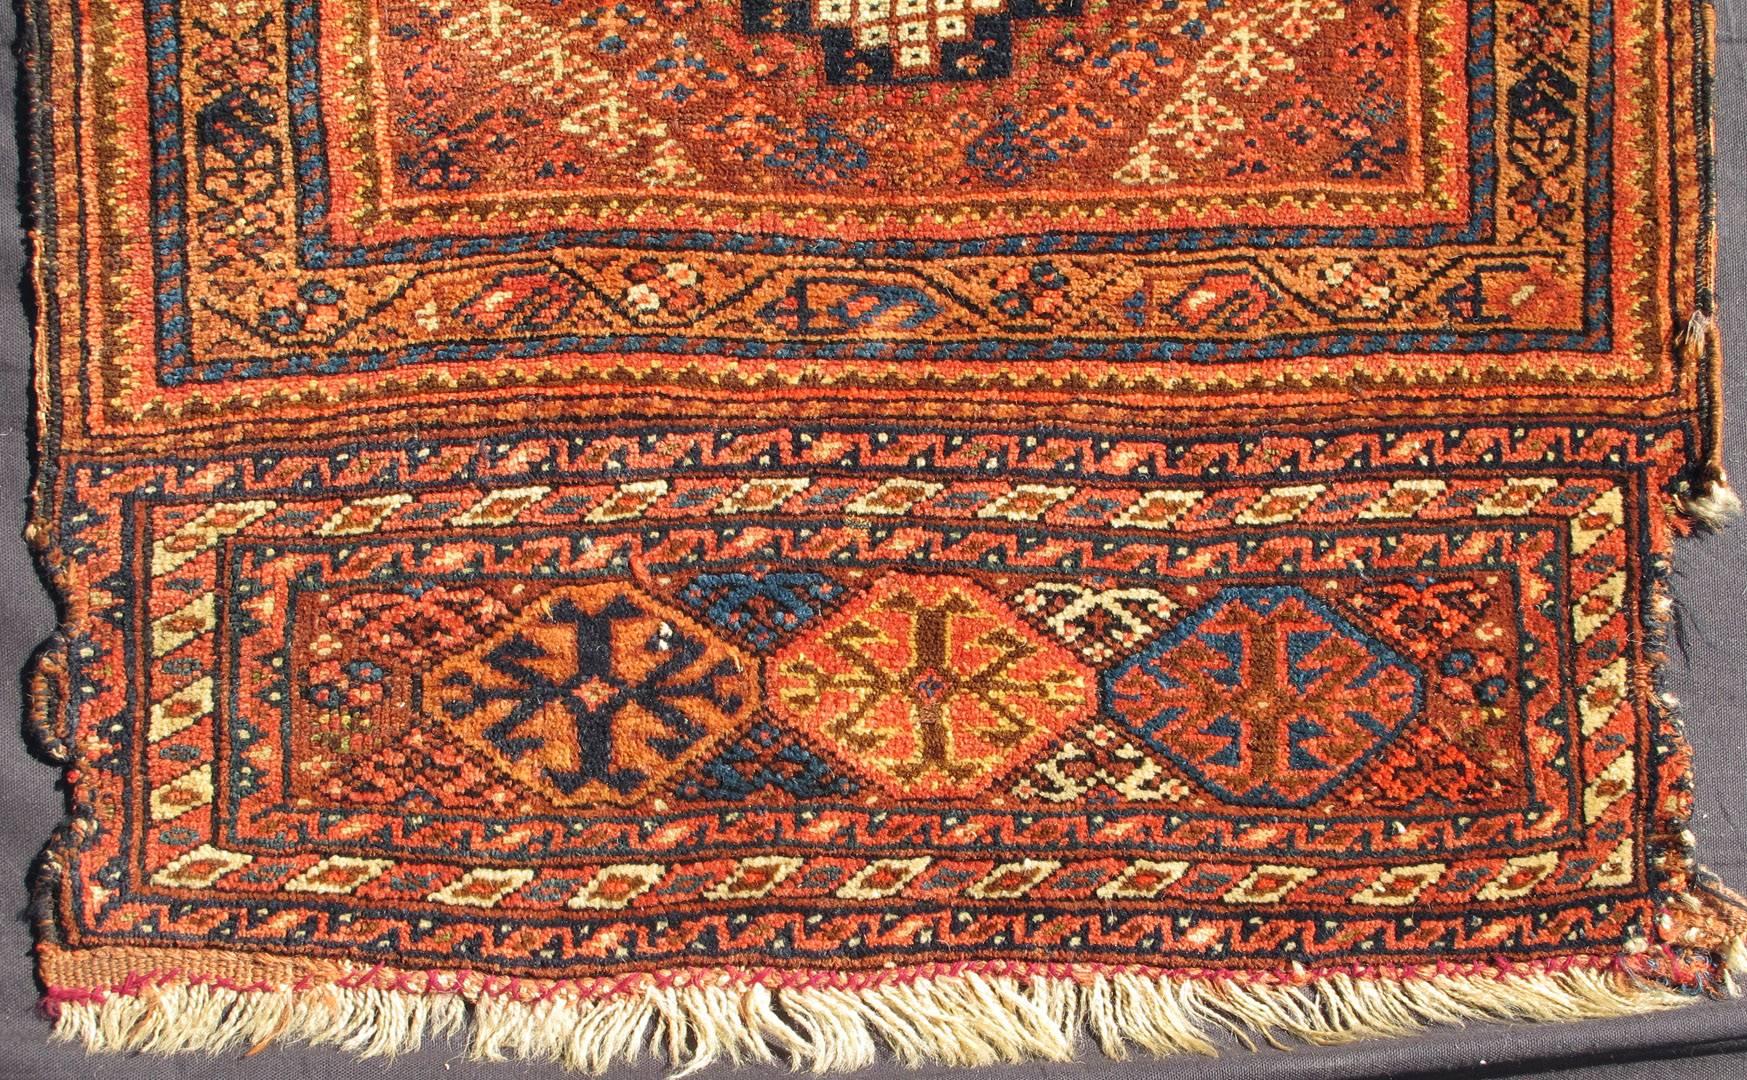 Tribal Antique Persian Two-Panel Qashqai Rug with Medallion Design in Orange and Brown